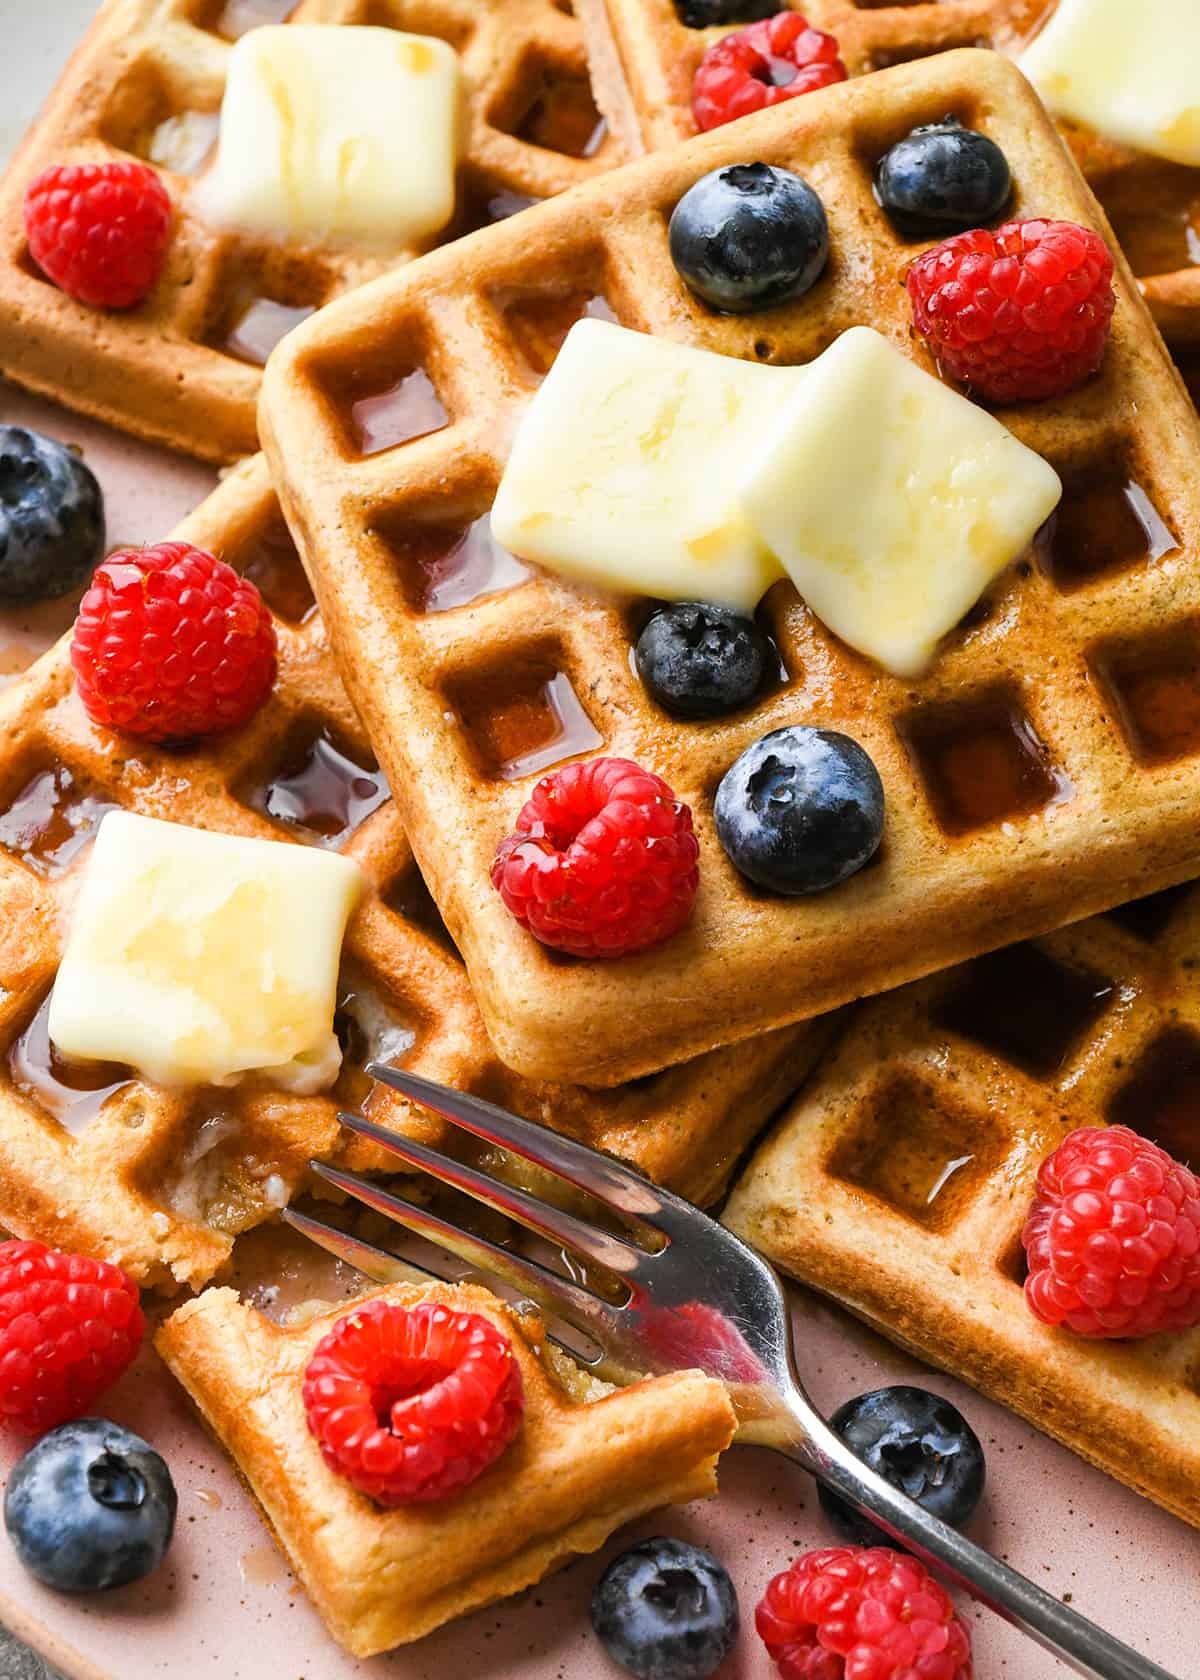 6 waffles on a plate with syrup, butter and berries with a fork taking a bite of one waffle